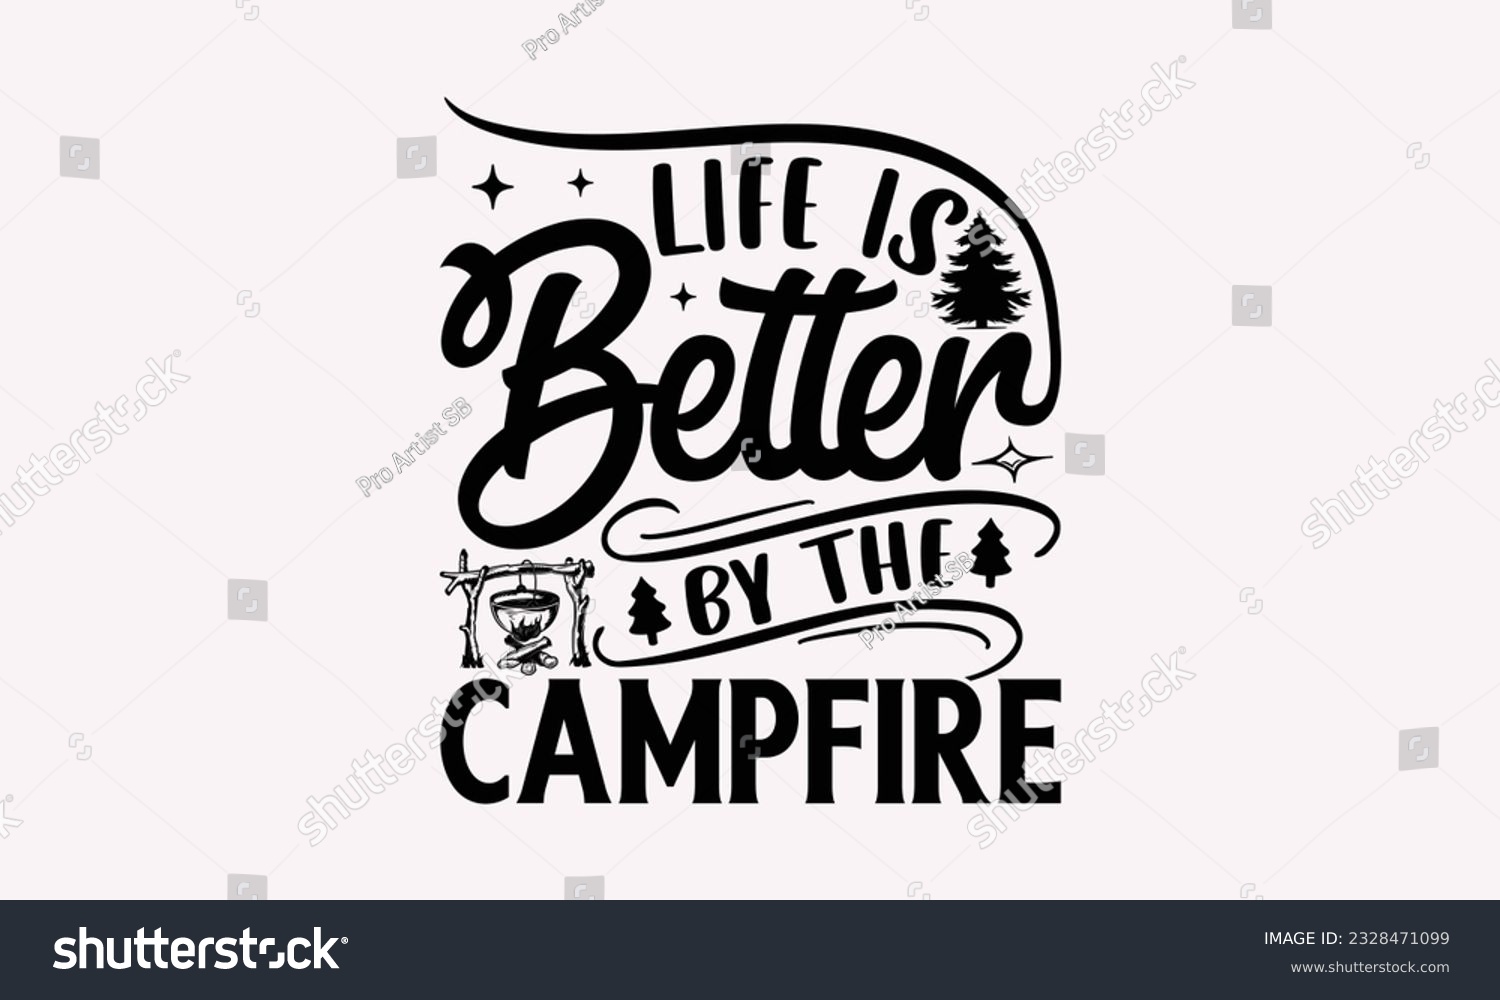 SVG of Life is better by the campfire - Camping SVG Design, Campfire T-shirt Design, Sign Making, Card Making, Scrapbooking, Vinyl Decals and Many More. svg